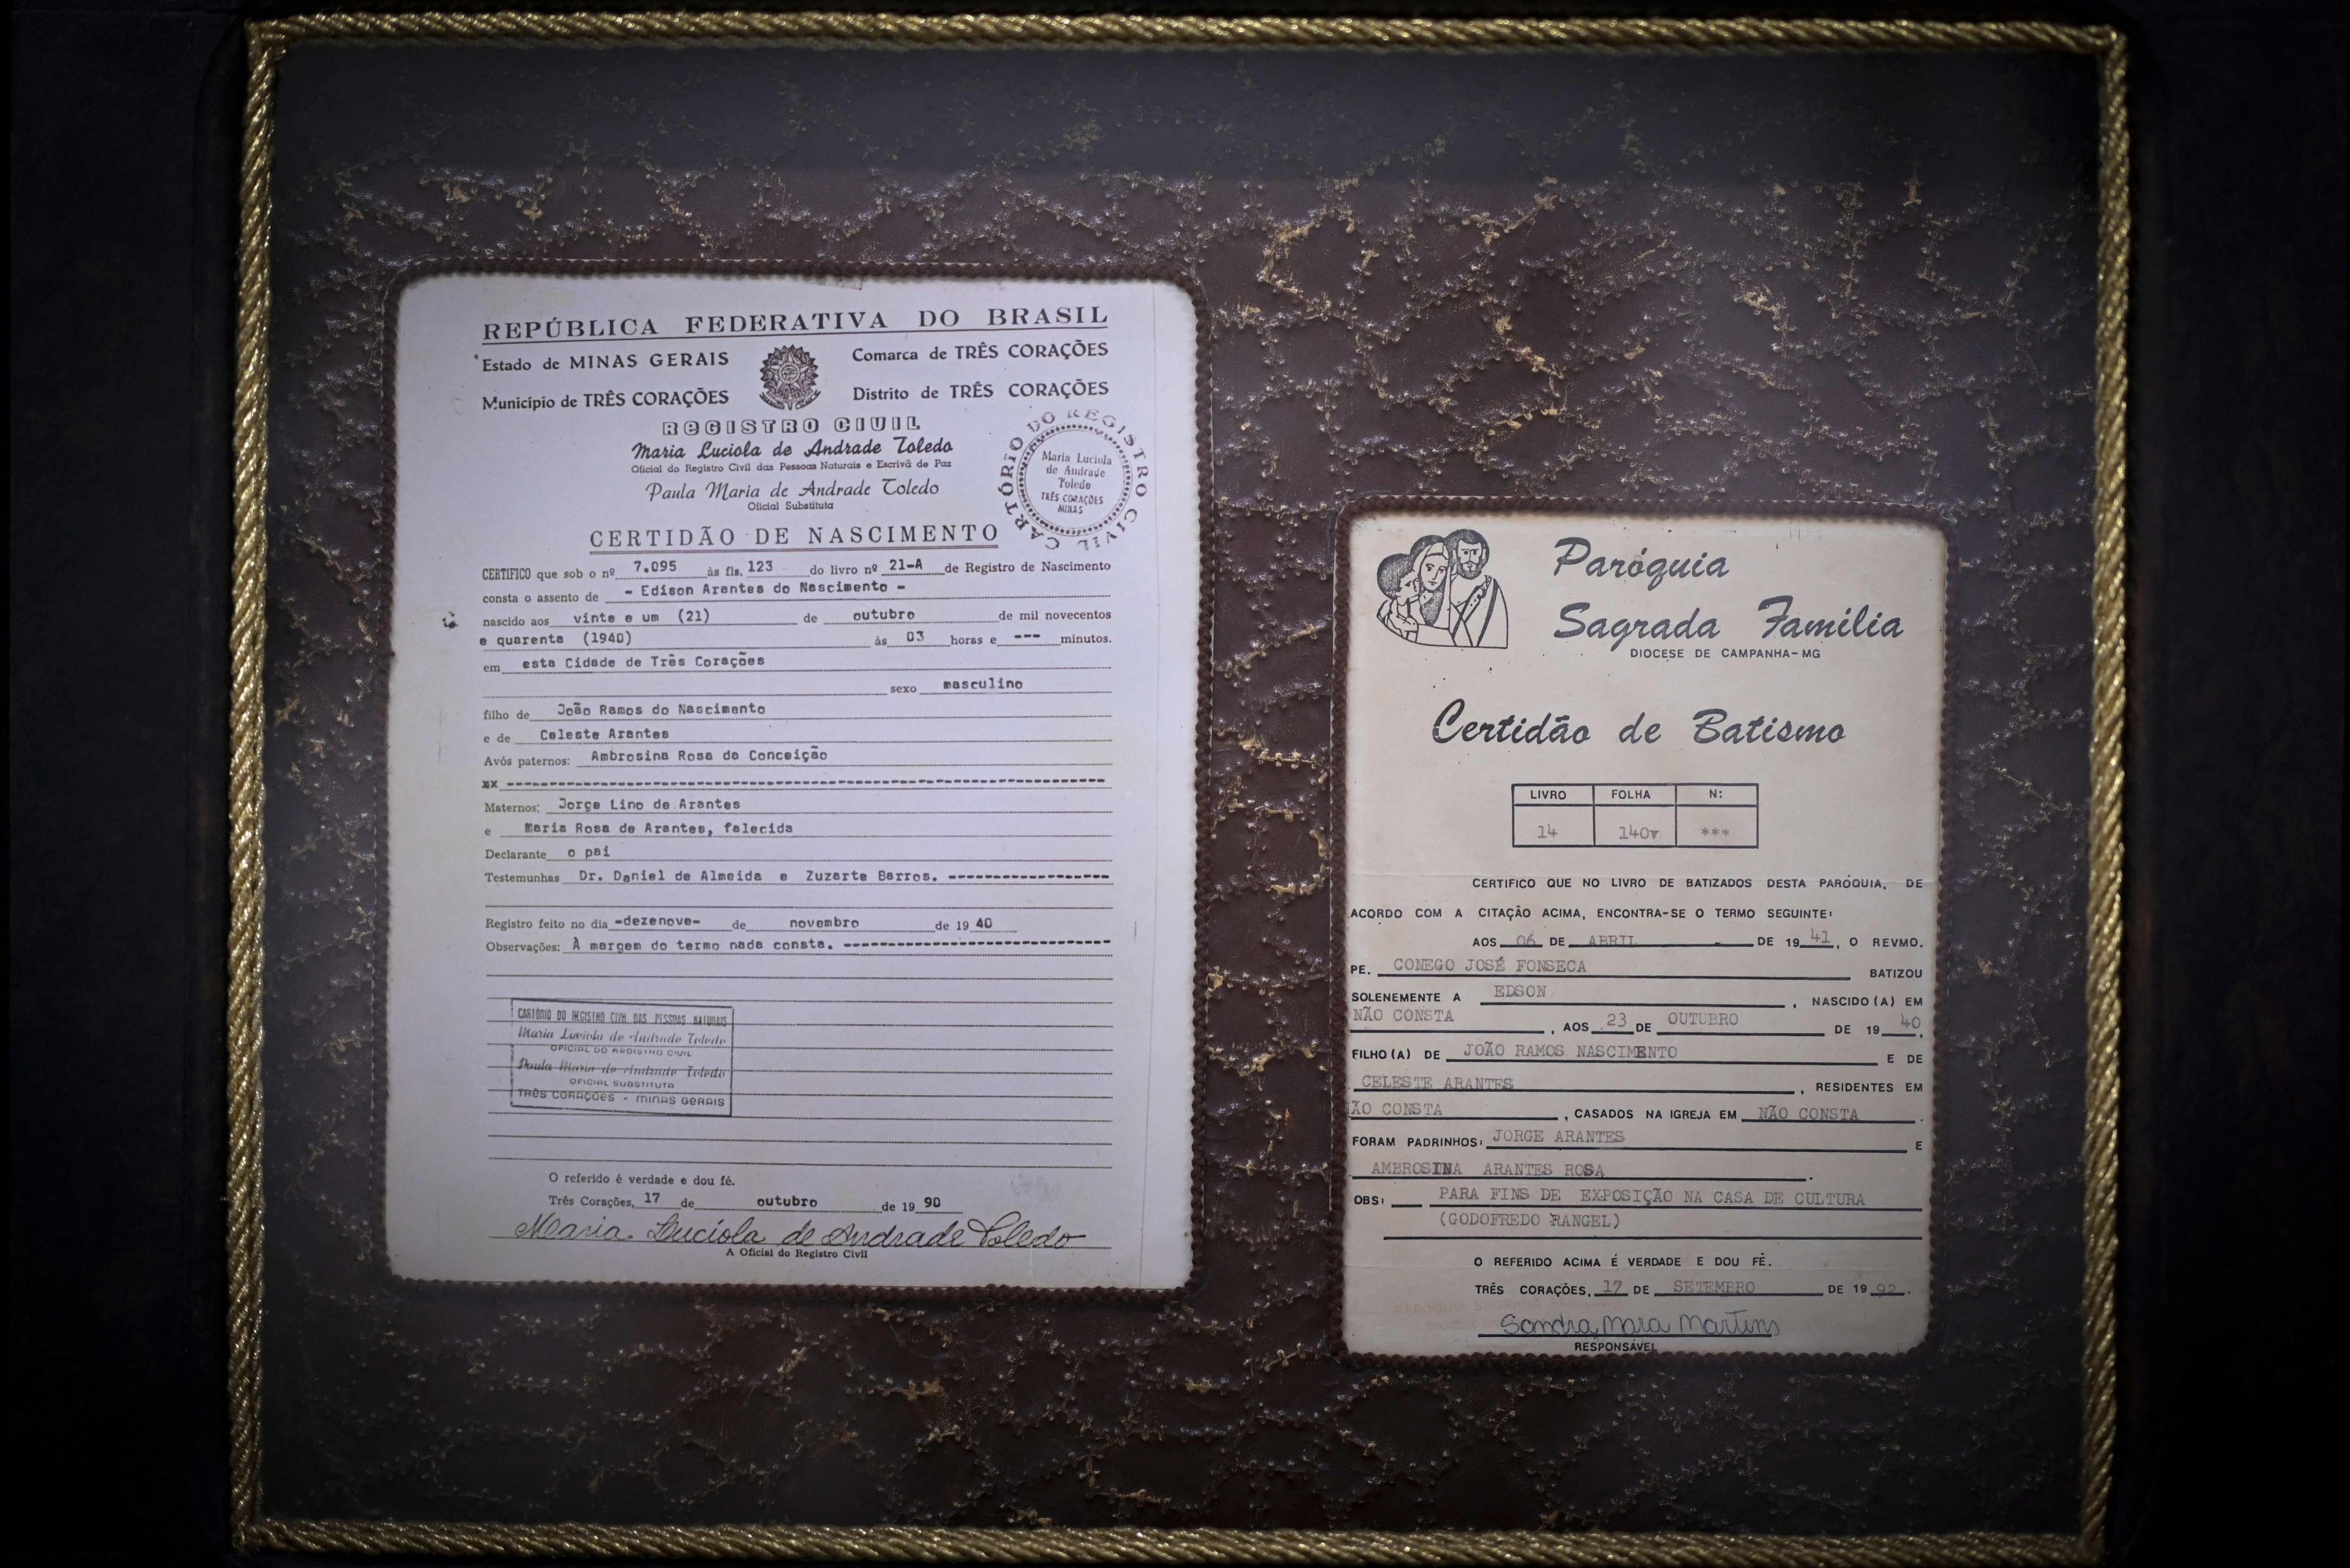 The birth certificate and baptism certificate of Brazil's football legend Edson Arantes do Nascimento "Pele" is on display in the Terra do Rei Museum in his hometown Tres Coracoes, state of Minas Gerais, Brazil, Dec. 28, 2022. (AFP Photo)